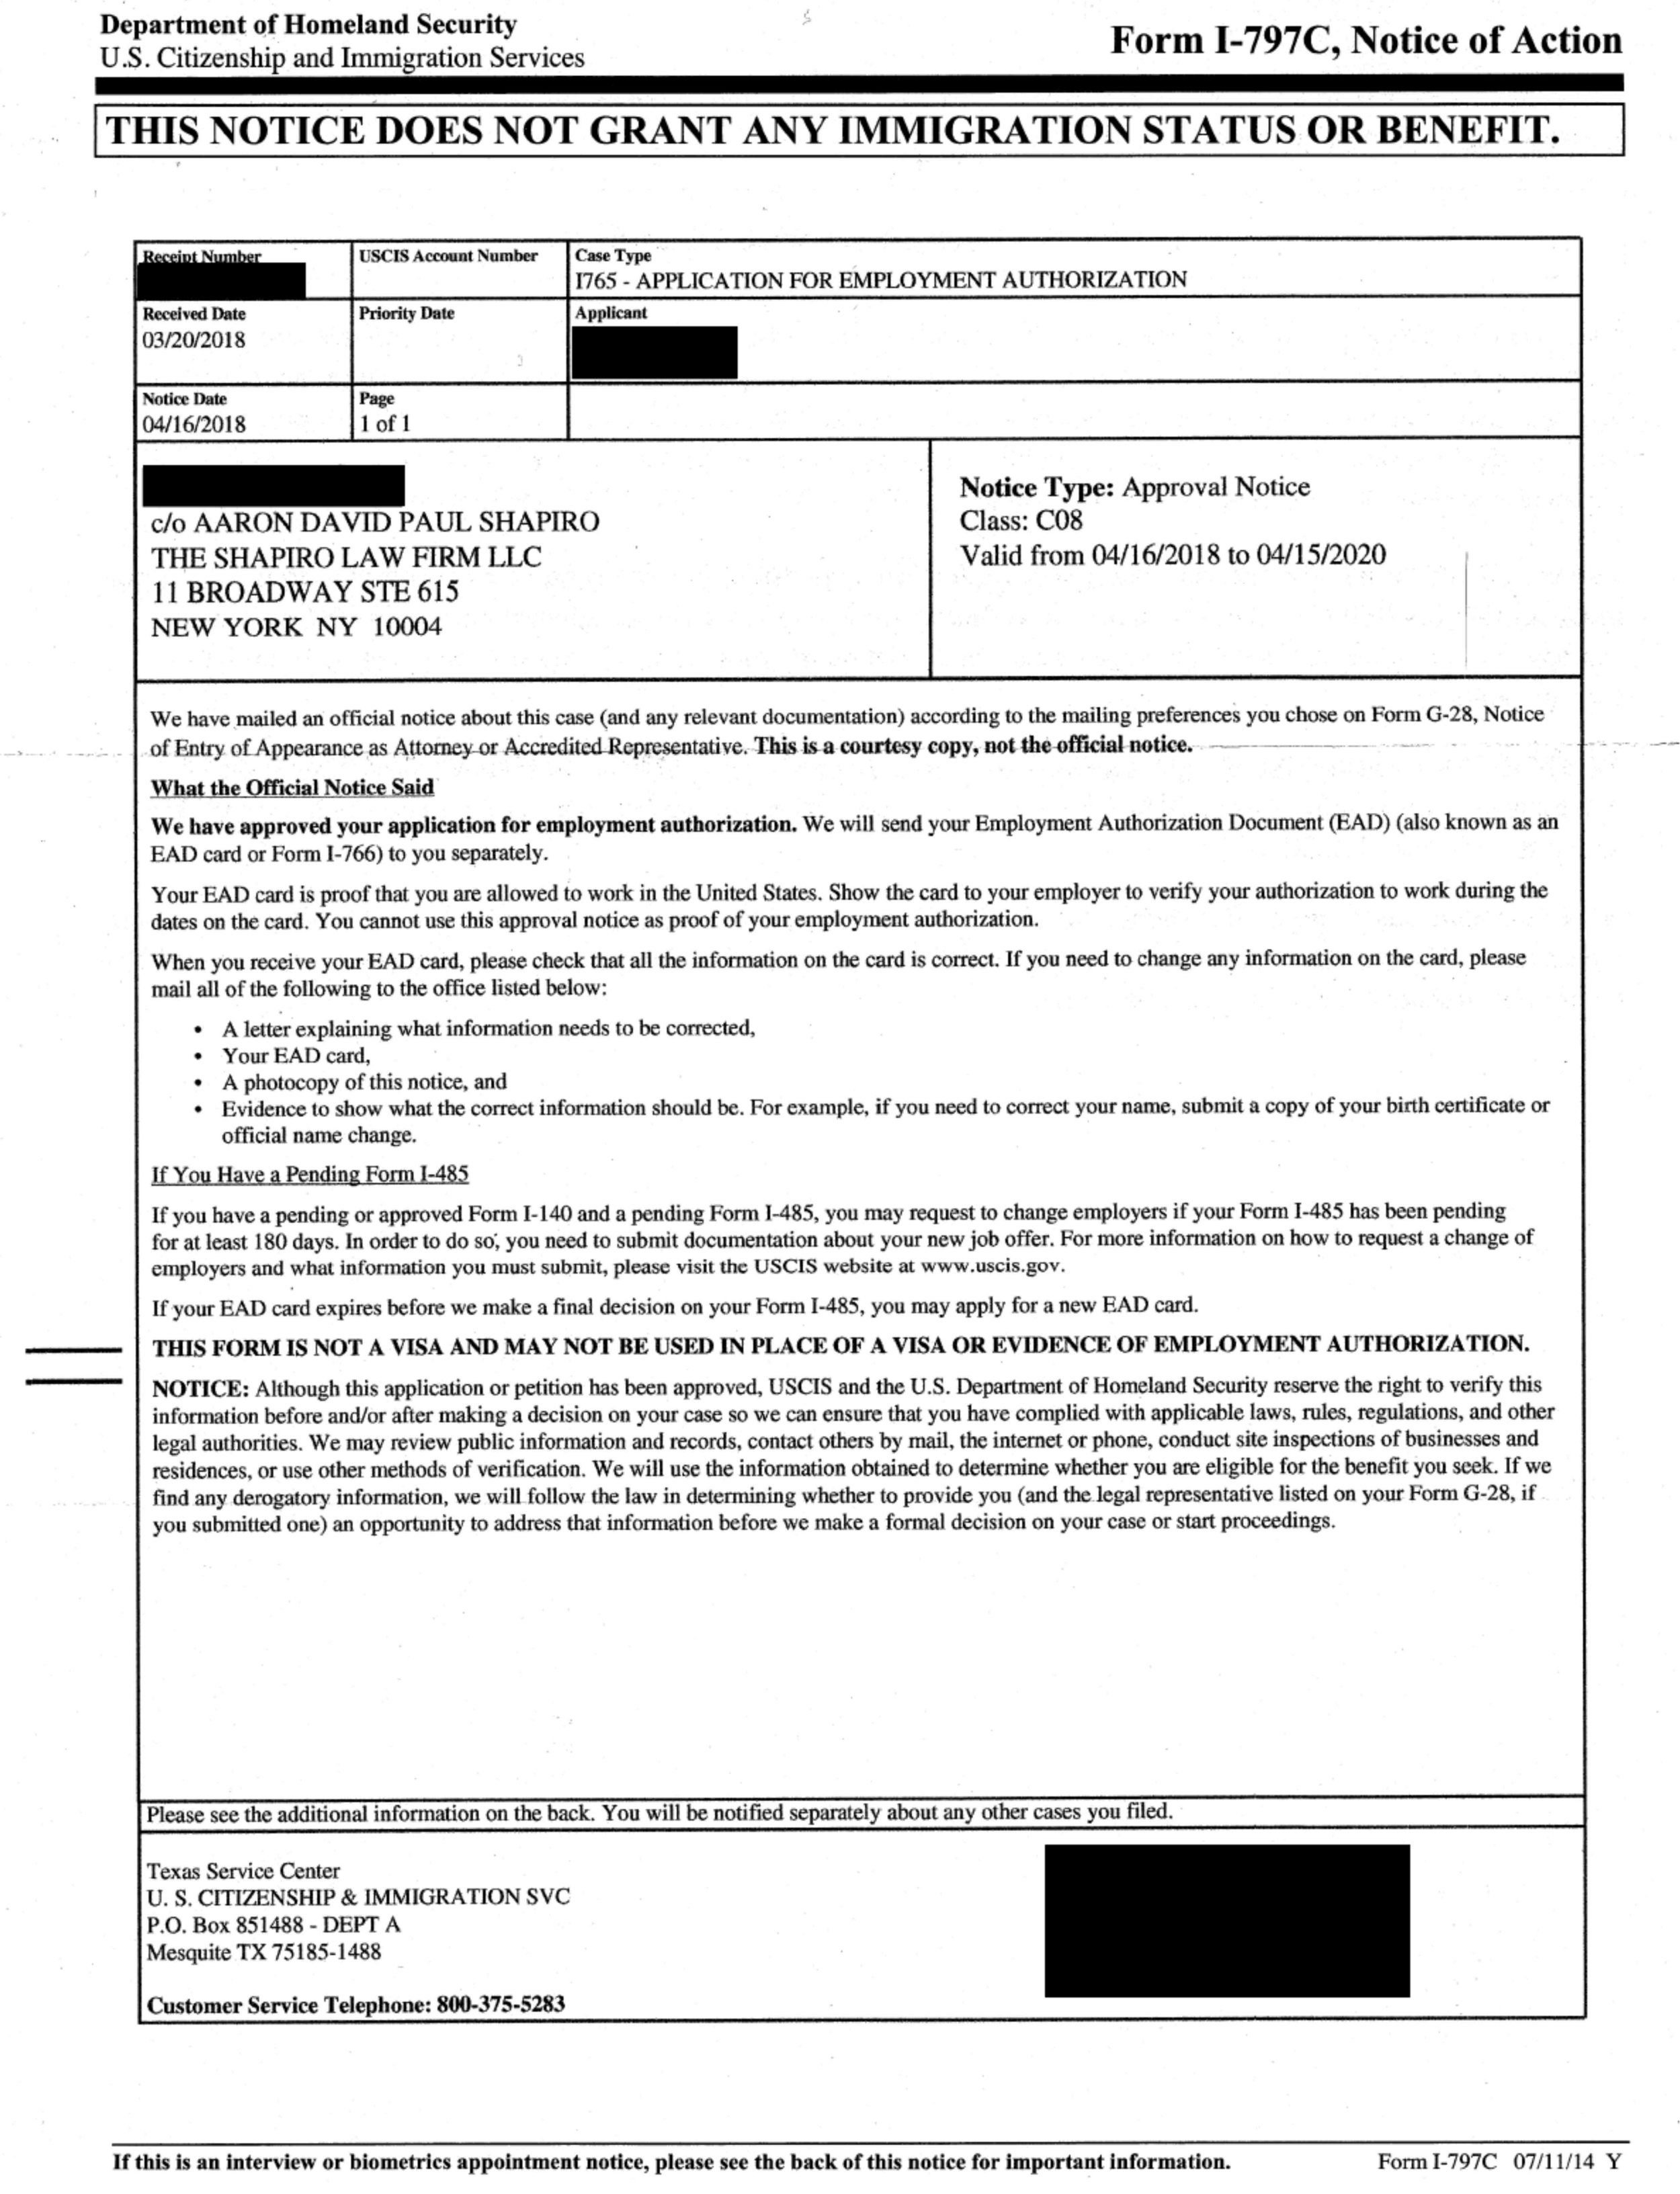 I-797C, Notice of Action - I-765 Approval Notice